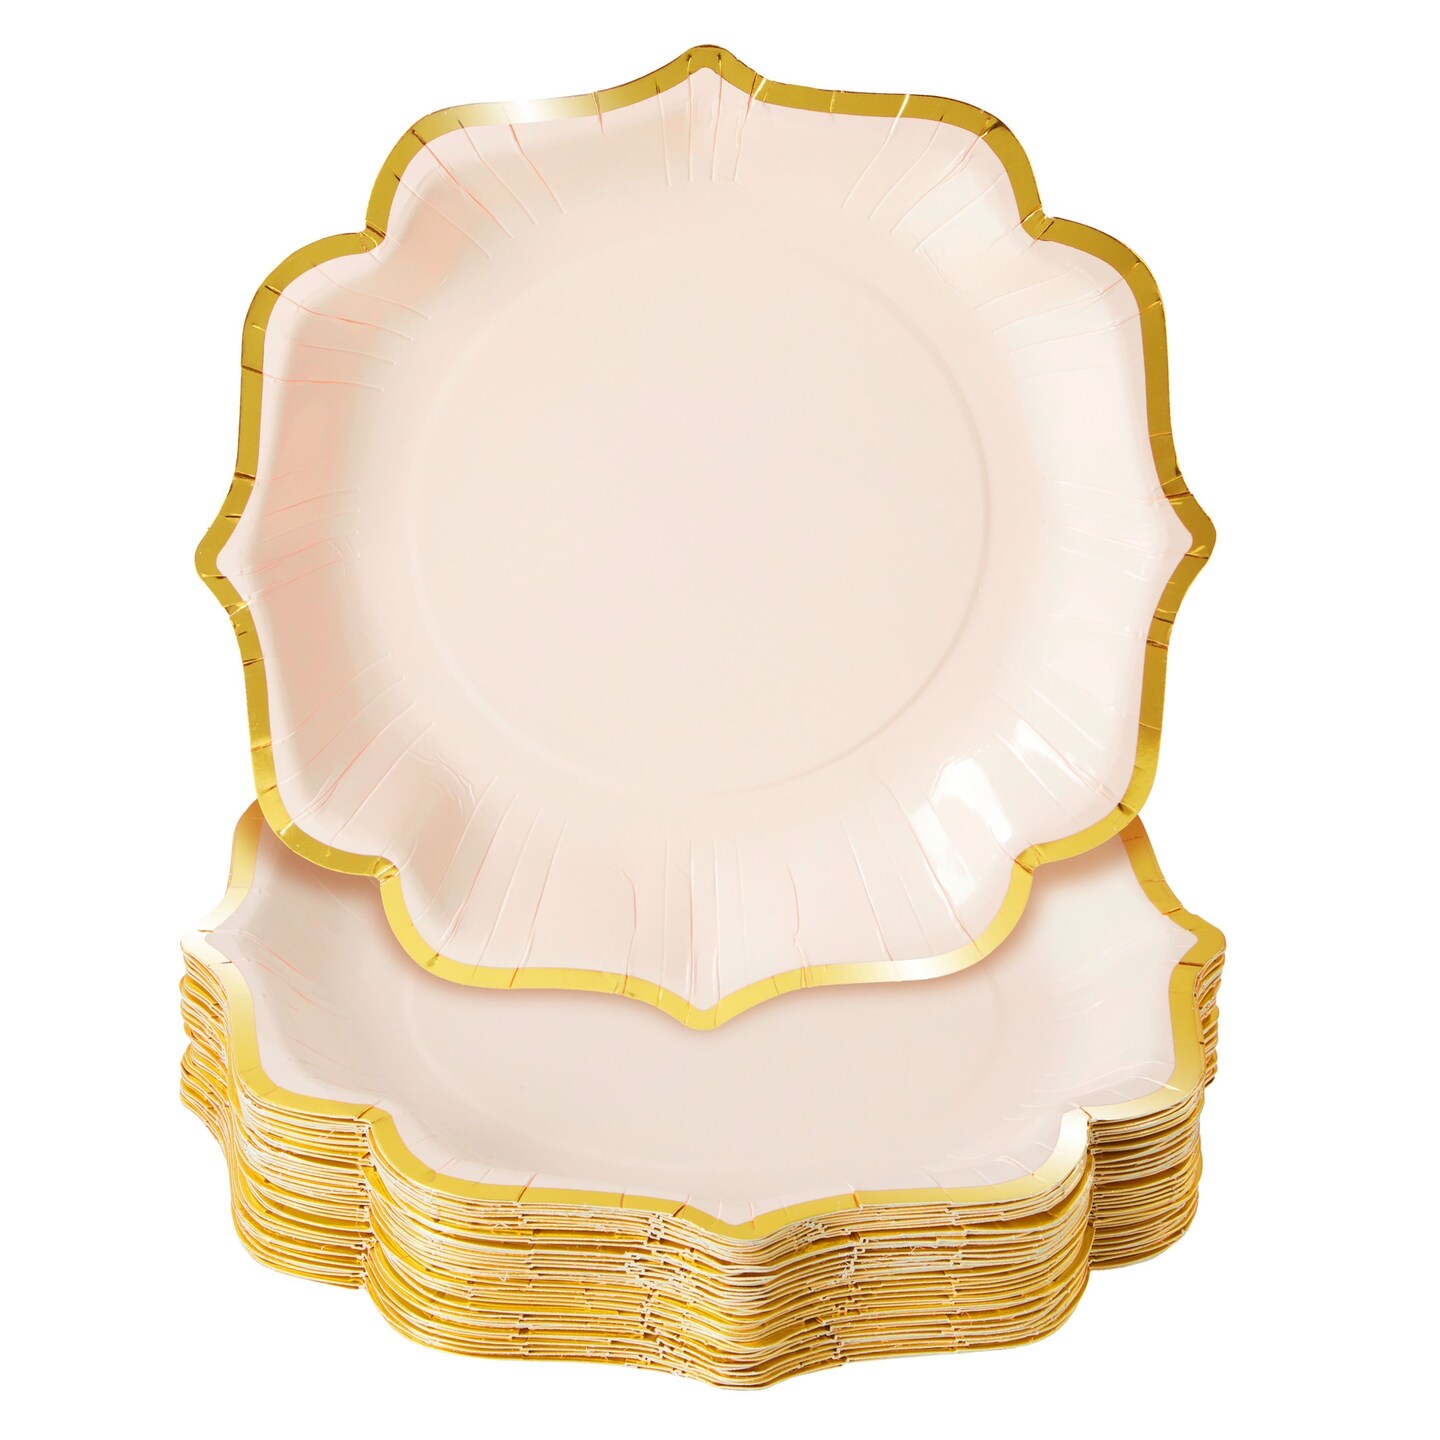 48-Pack Pink Scalloped Paper Party Plates with Gold Foil Edges (9 in)